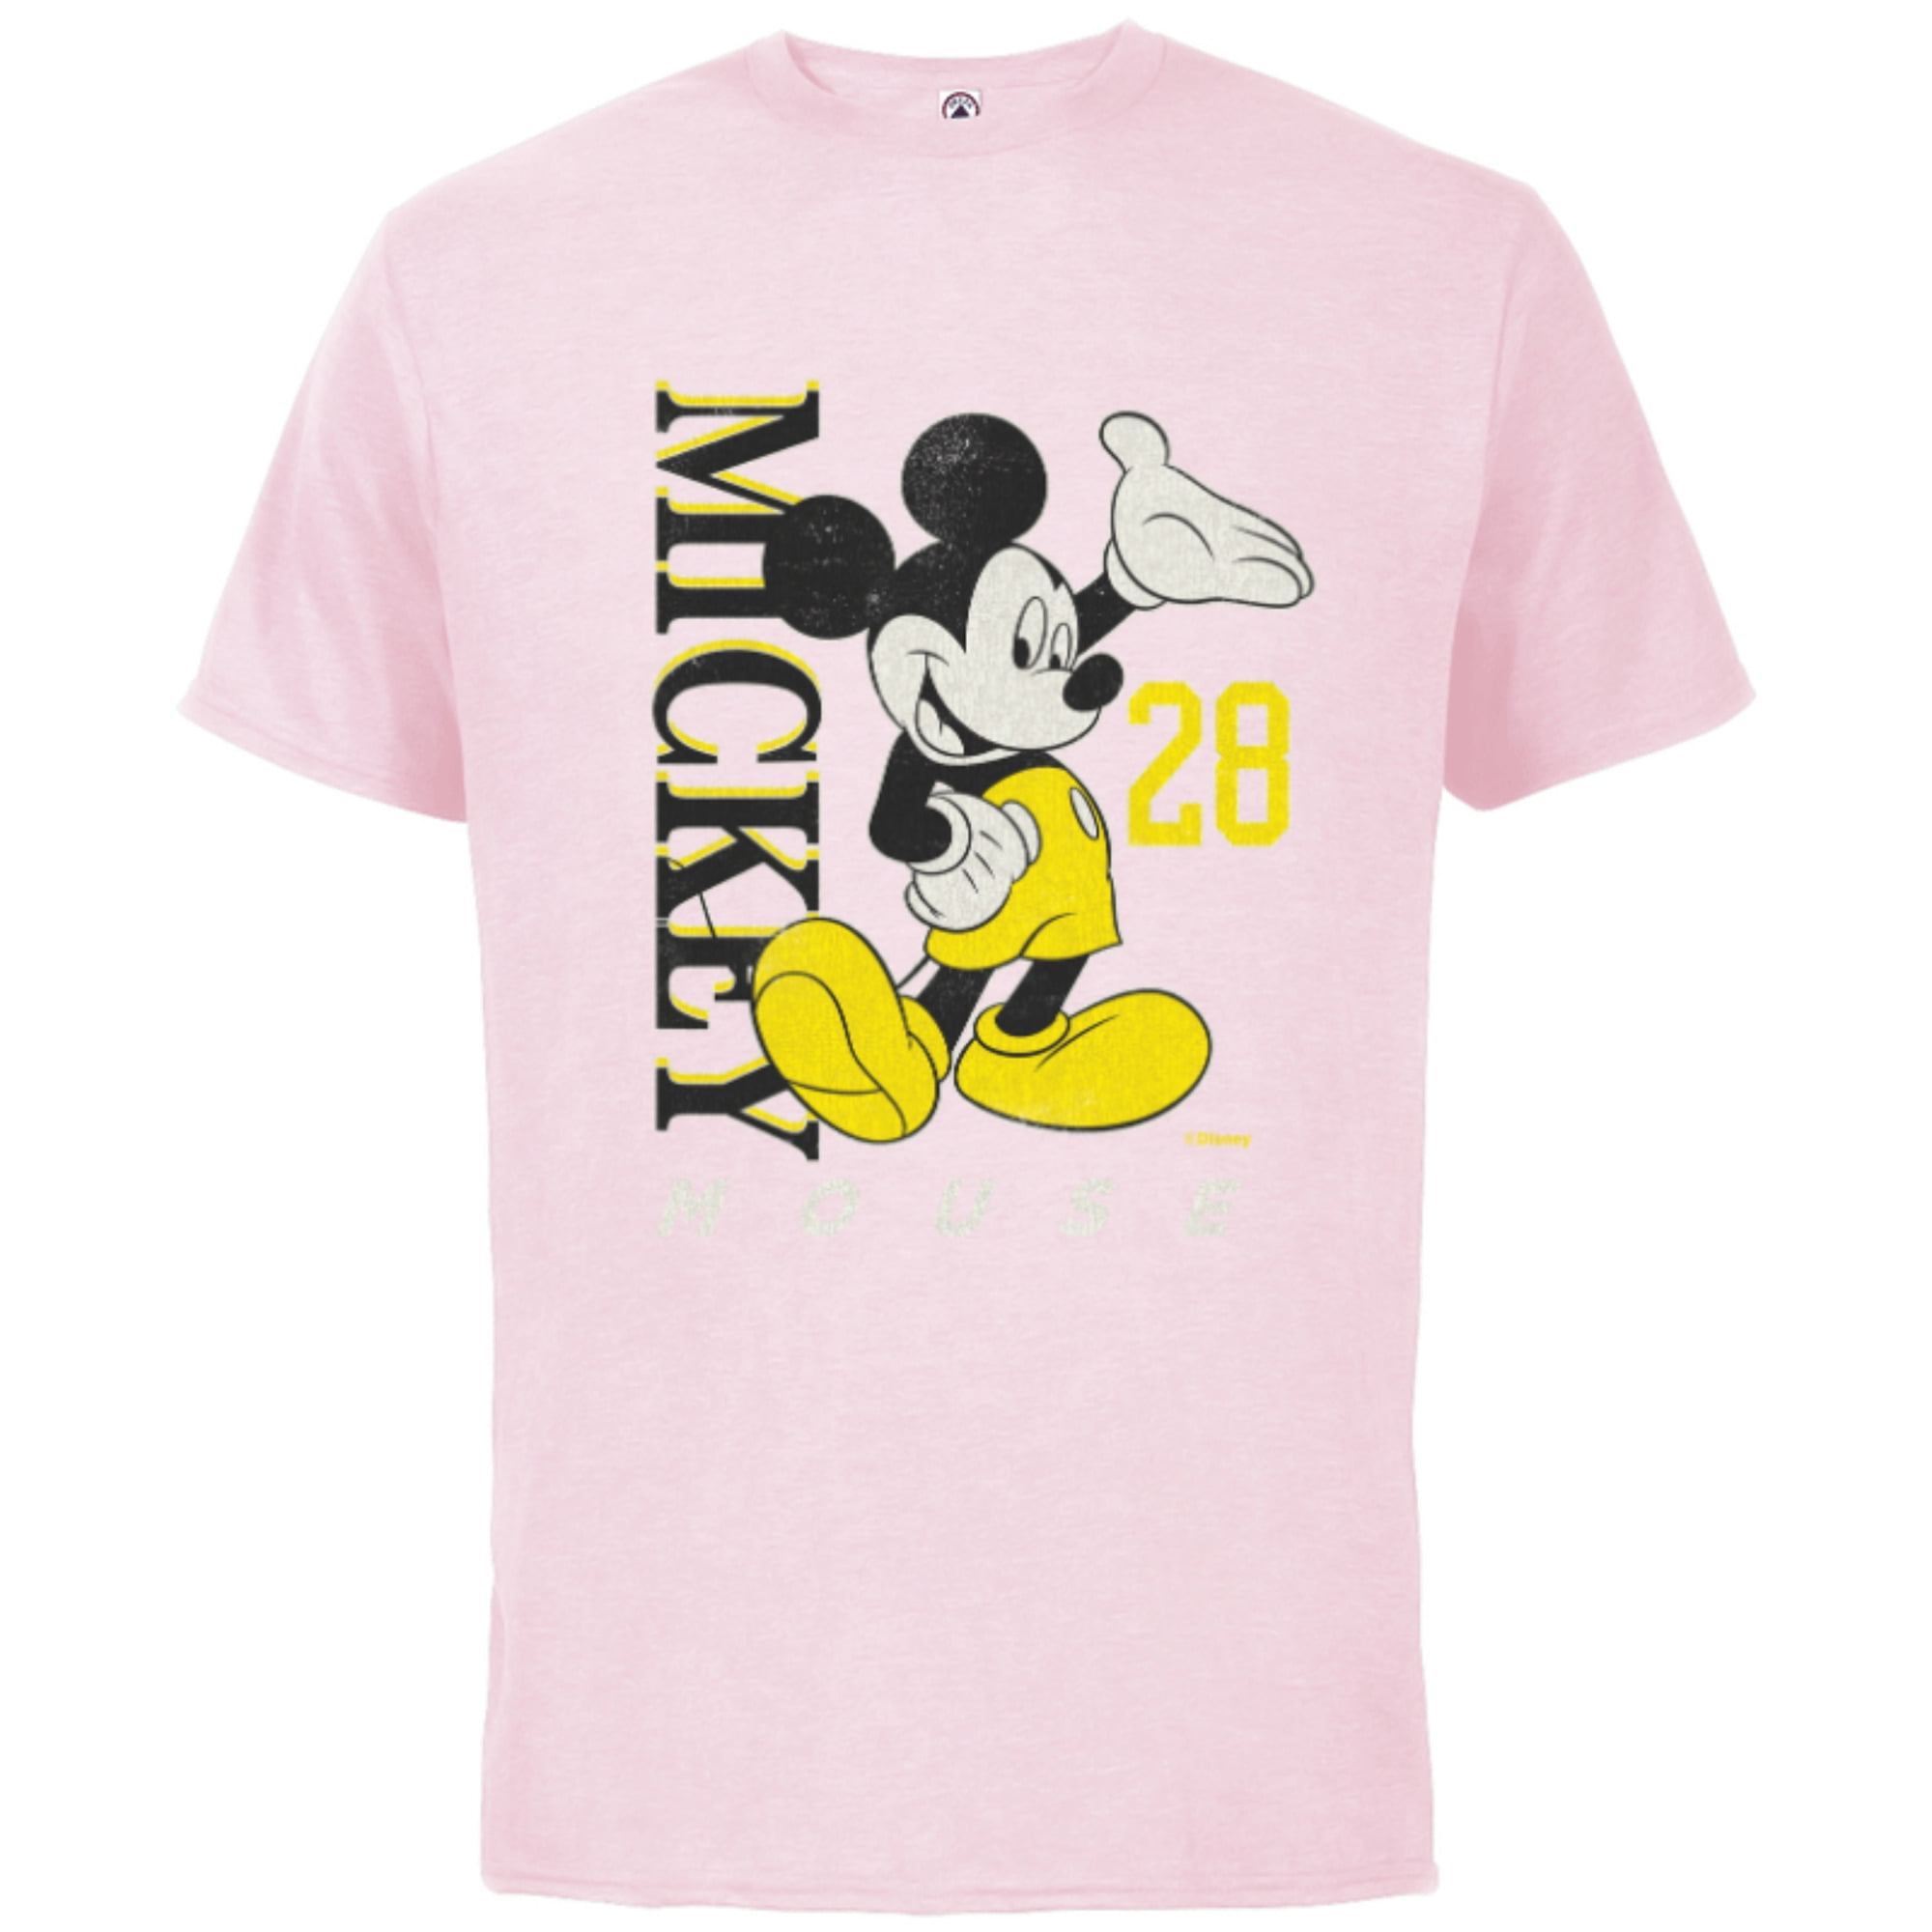 Disney Mickey Mouse Vintage Classics - Black Adults 28 Sleeve Customized-Black Cotton & T-Shirt Short for - Yellow